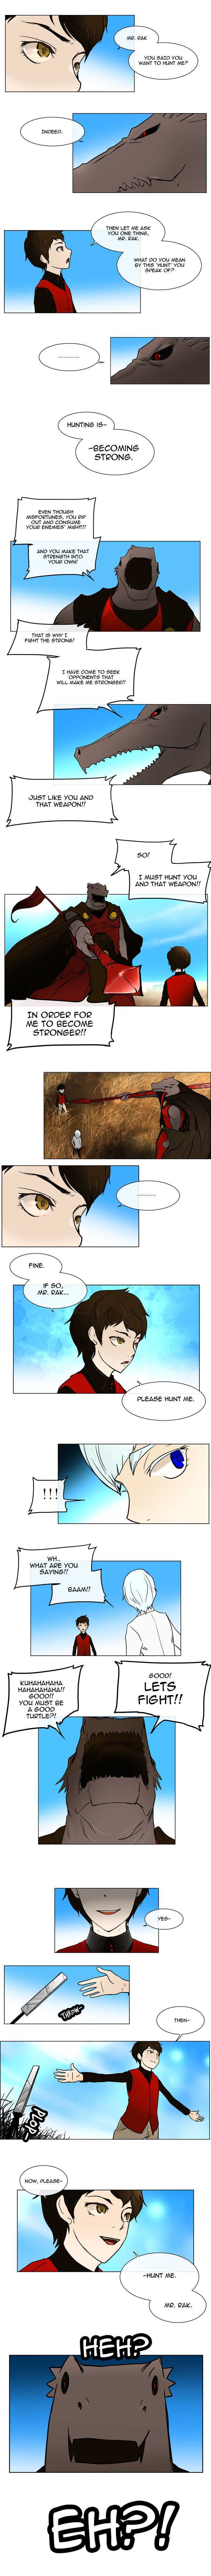 Tower of God 8